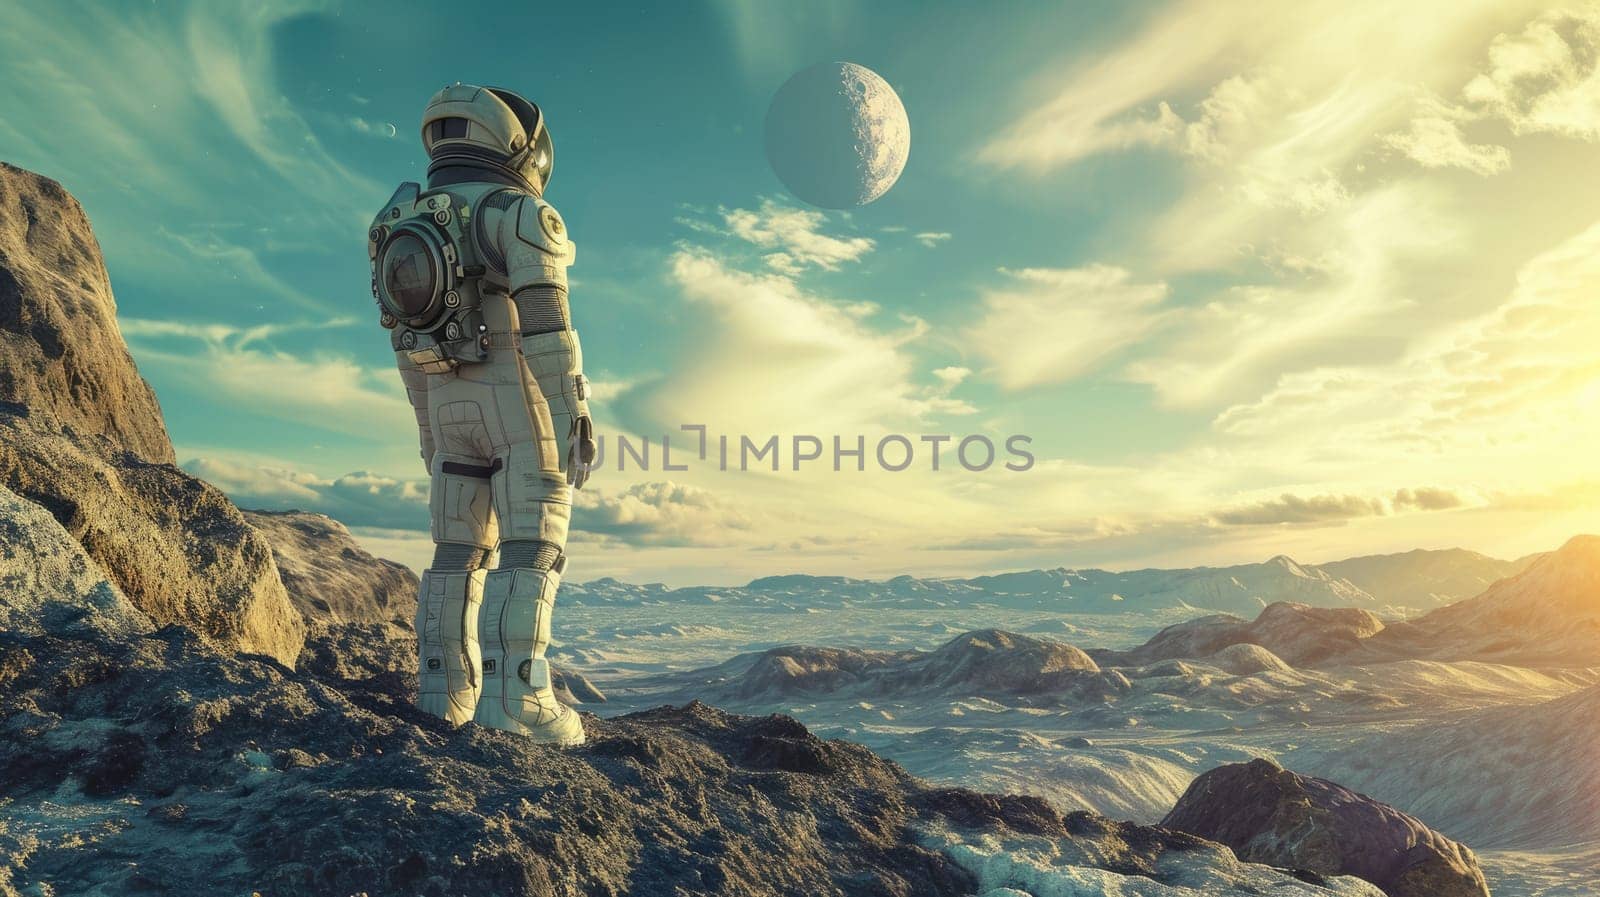 An astronaut in a space suit exploring a distant planet's surface. Resplendent. by biancoblue